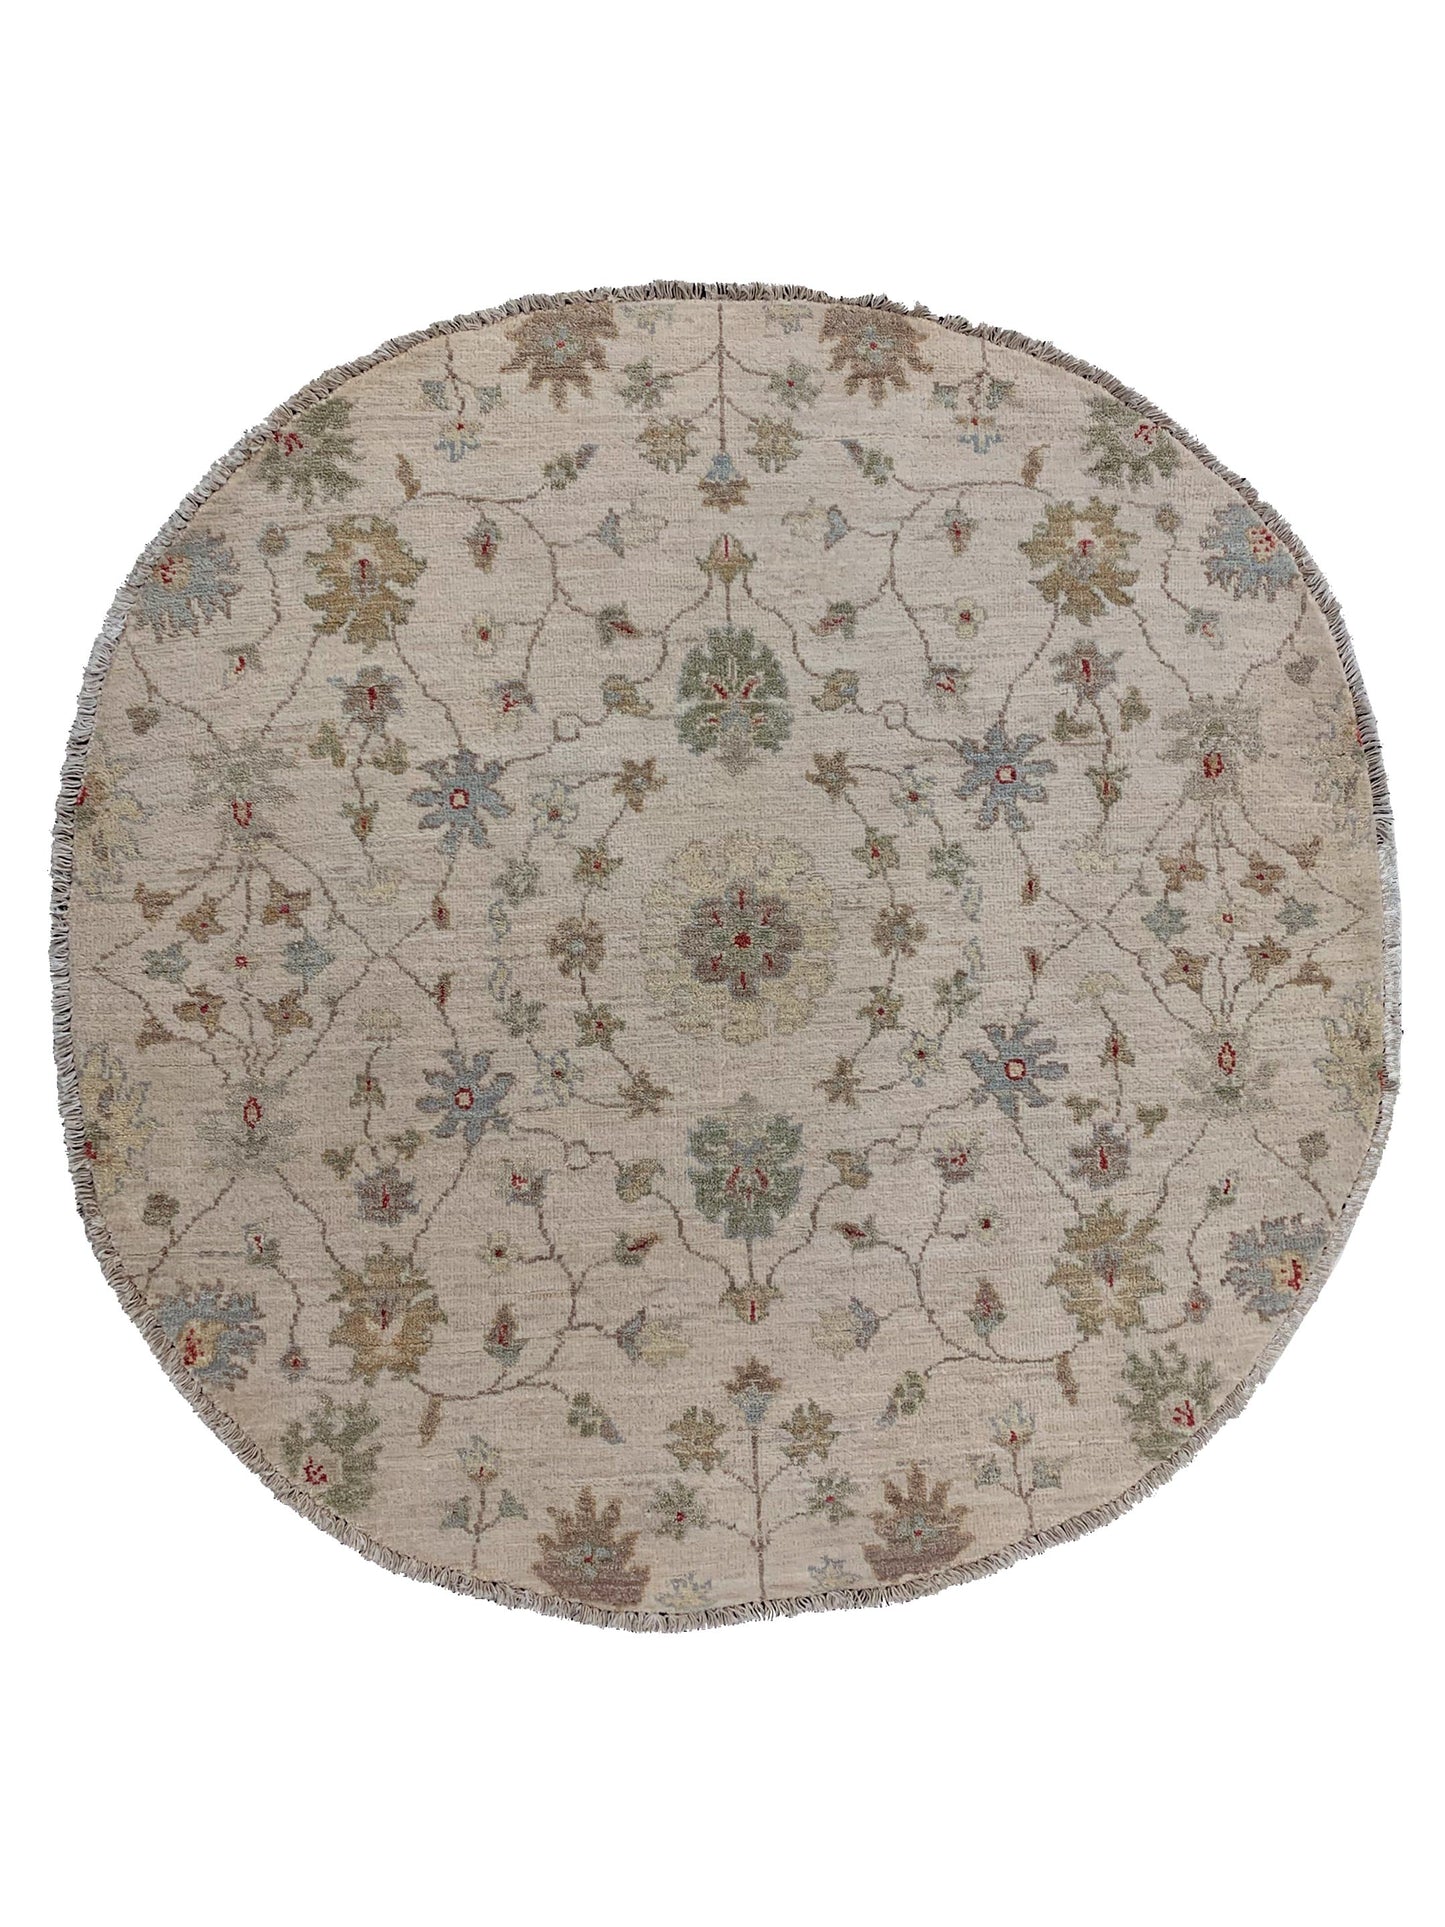 Artisan Patricia B10 Beige Traditional Knotted Rug